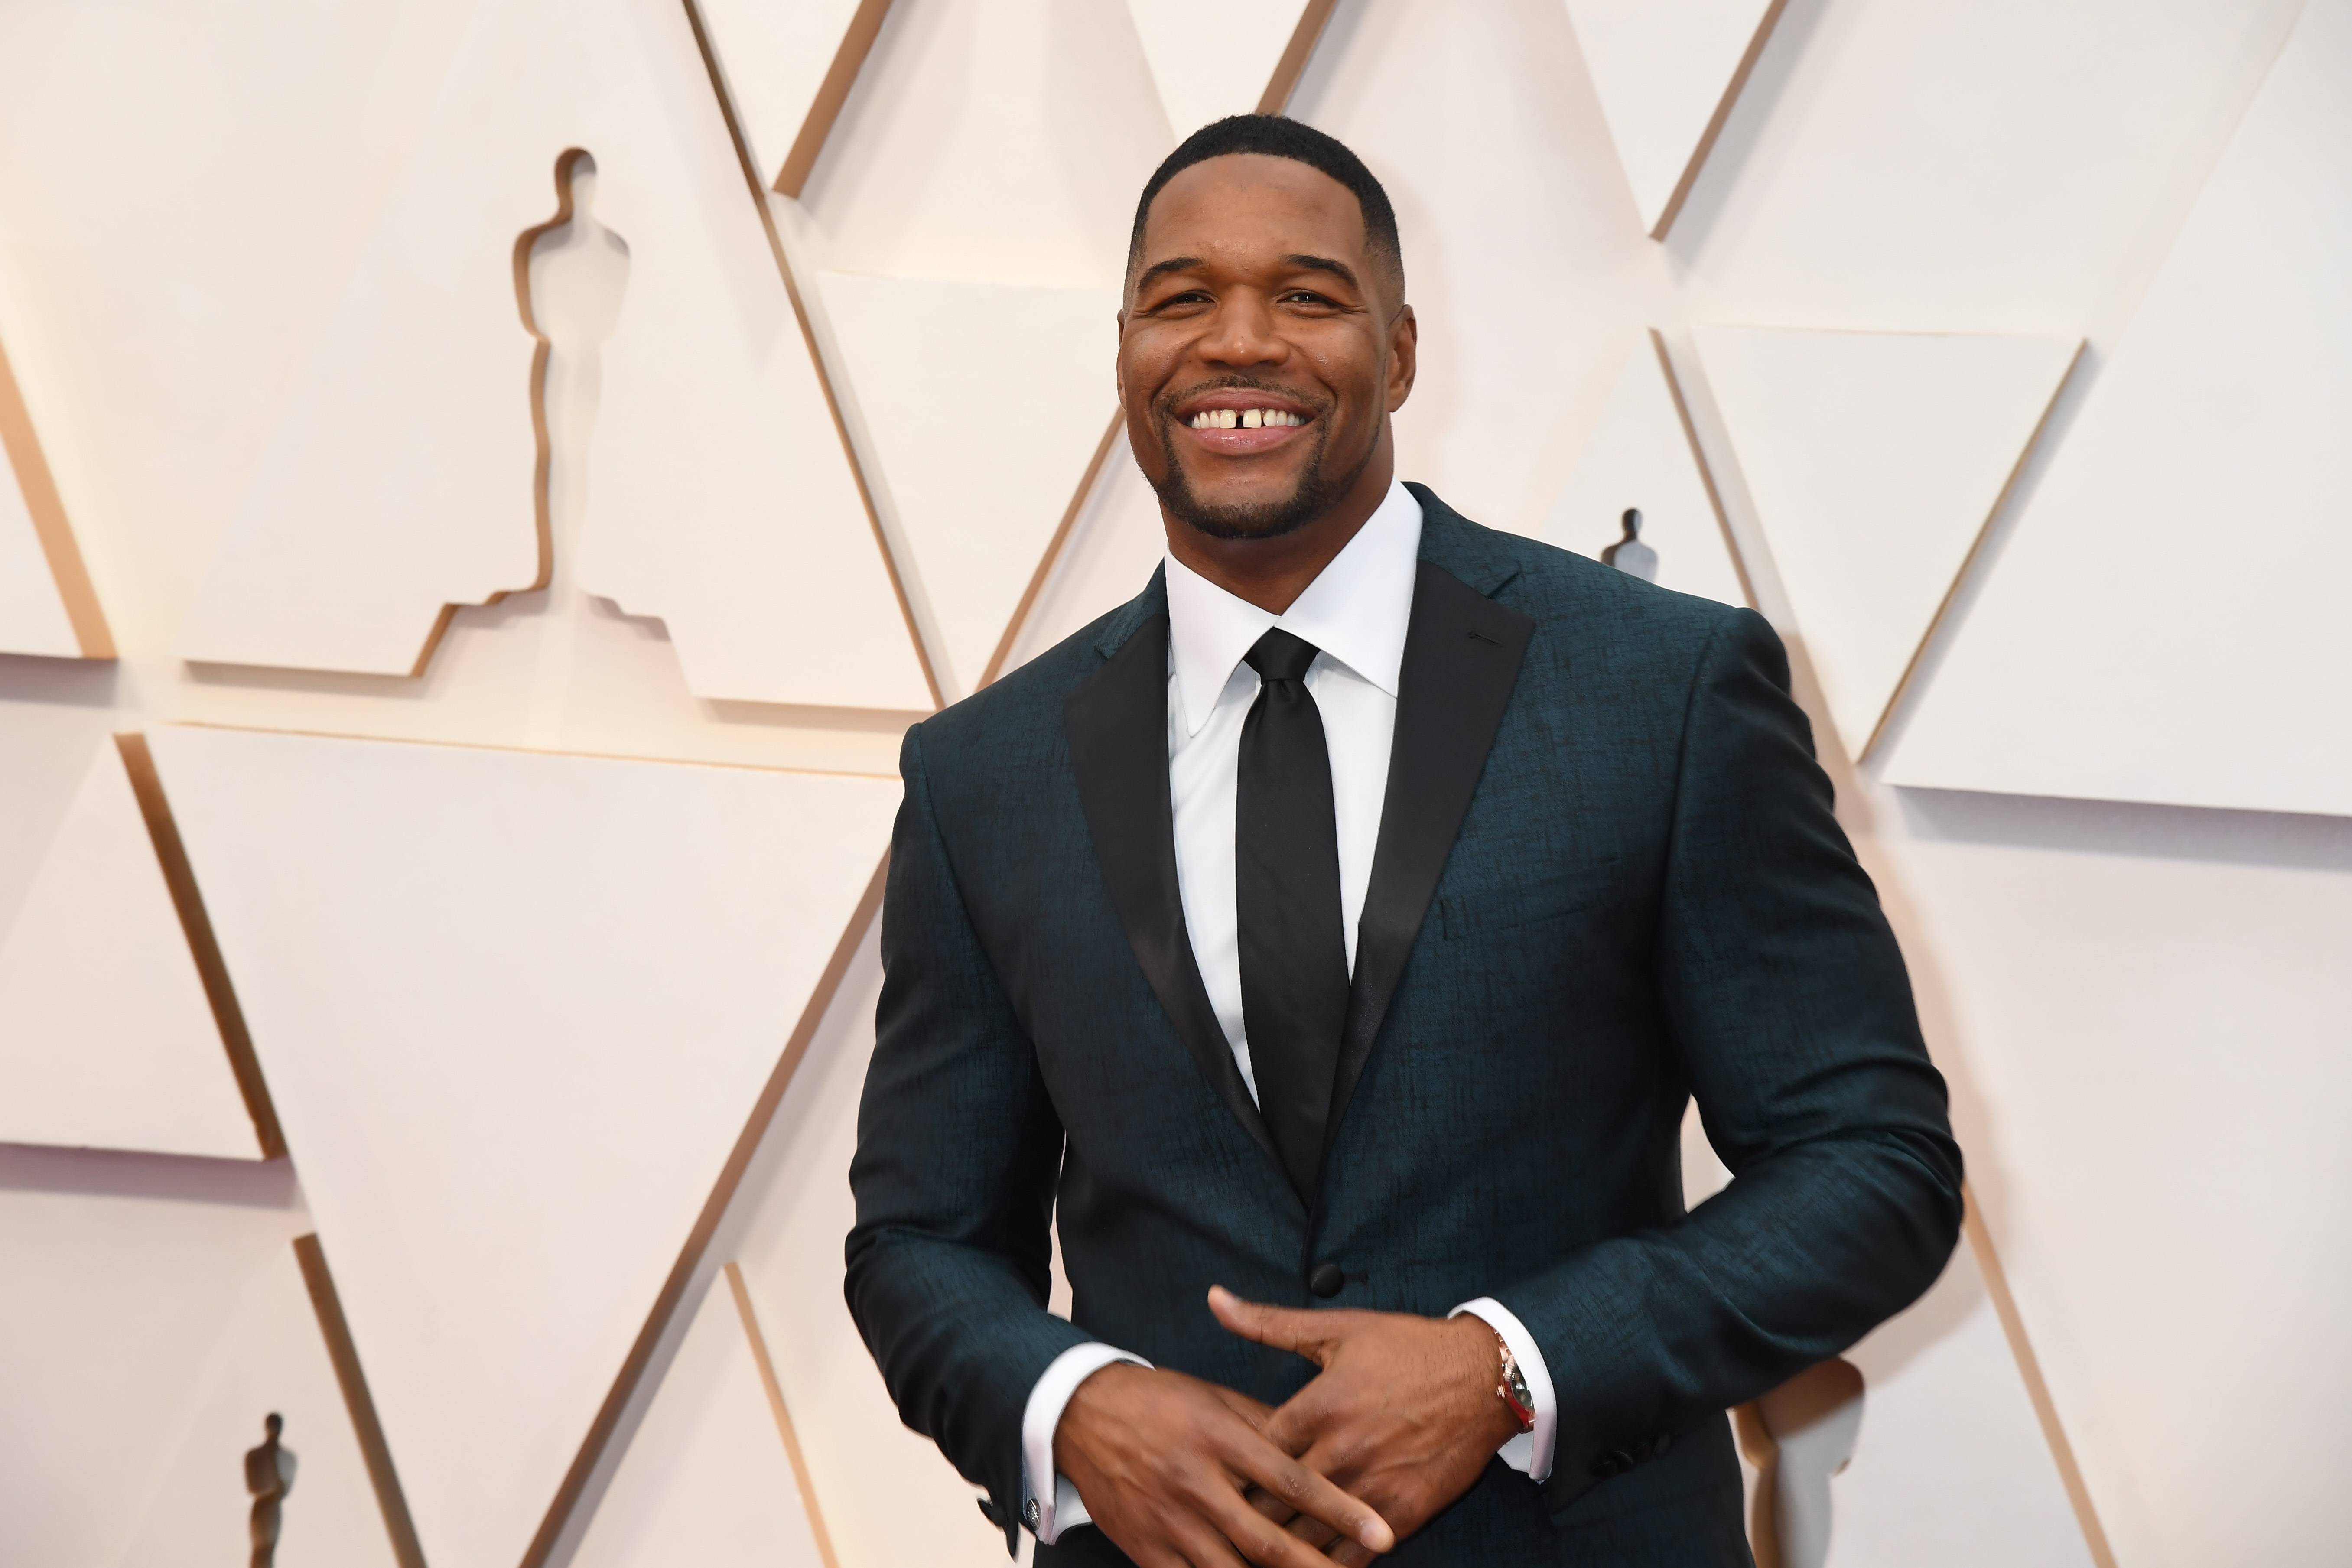 HOLLYWOOD, CALIFORNIA - FEBRUARY 09: Michael Strahan attends the 92nd Annual Academy Awards at Hollywood and Highland on February 09, 2020 in Hollywood, California. (Photo by Jeff Kravitz/FilmMagic)